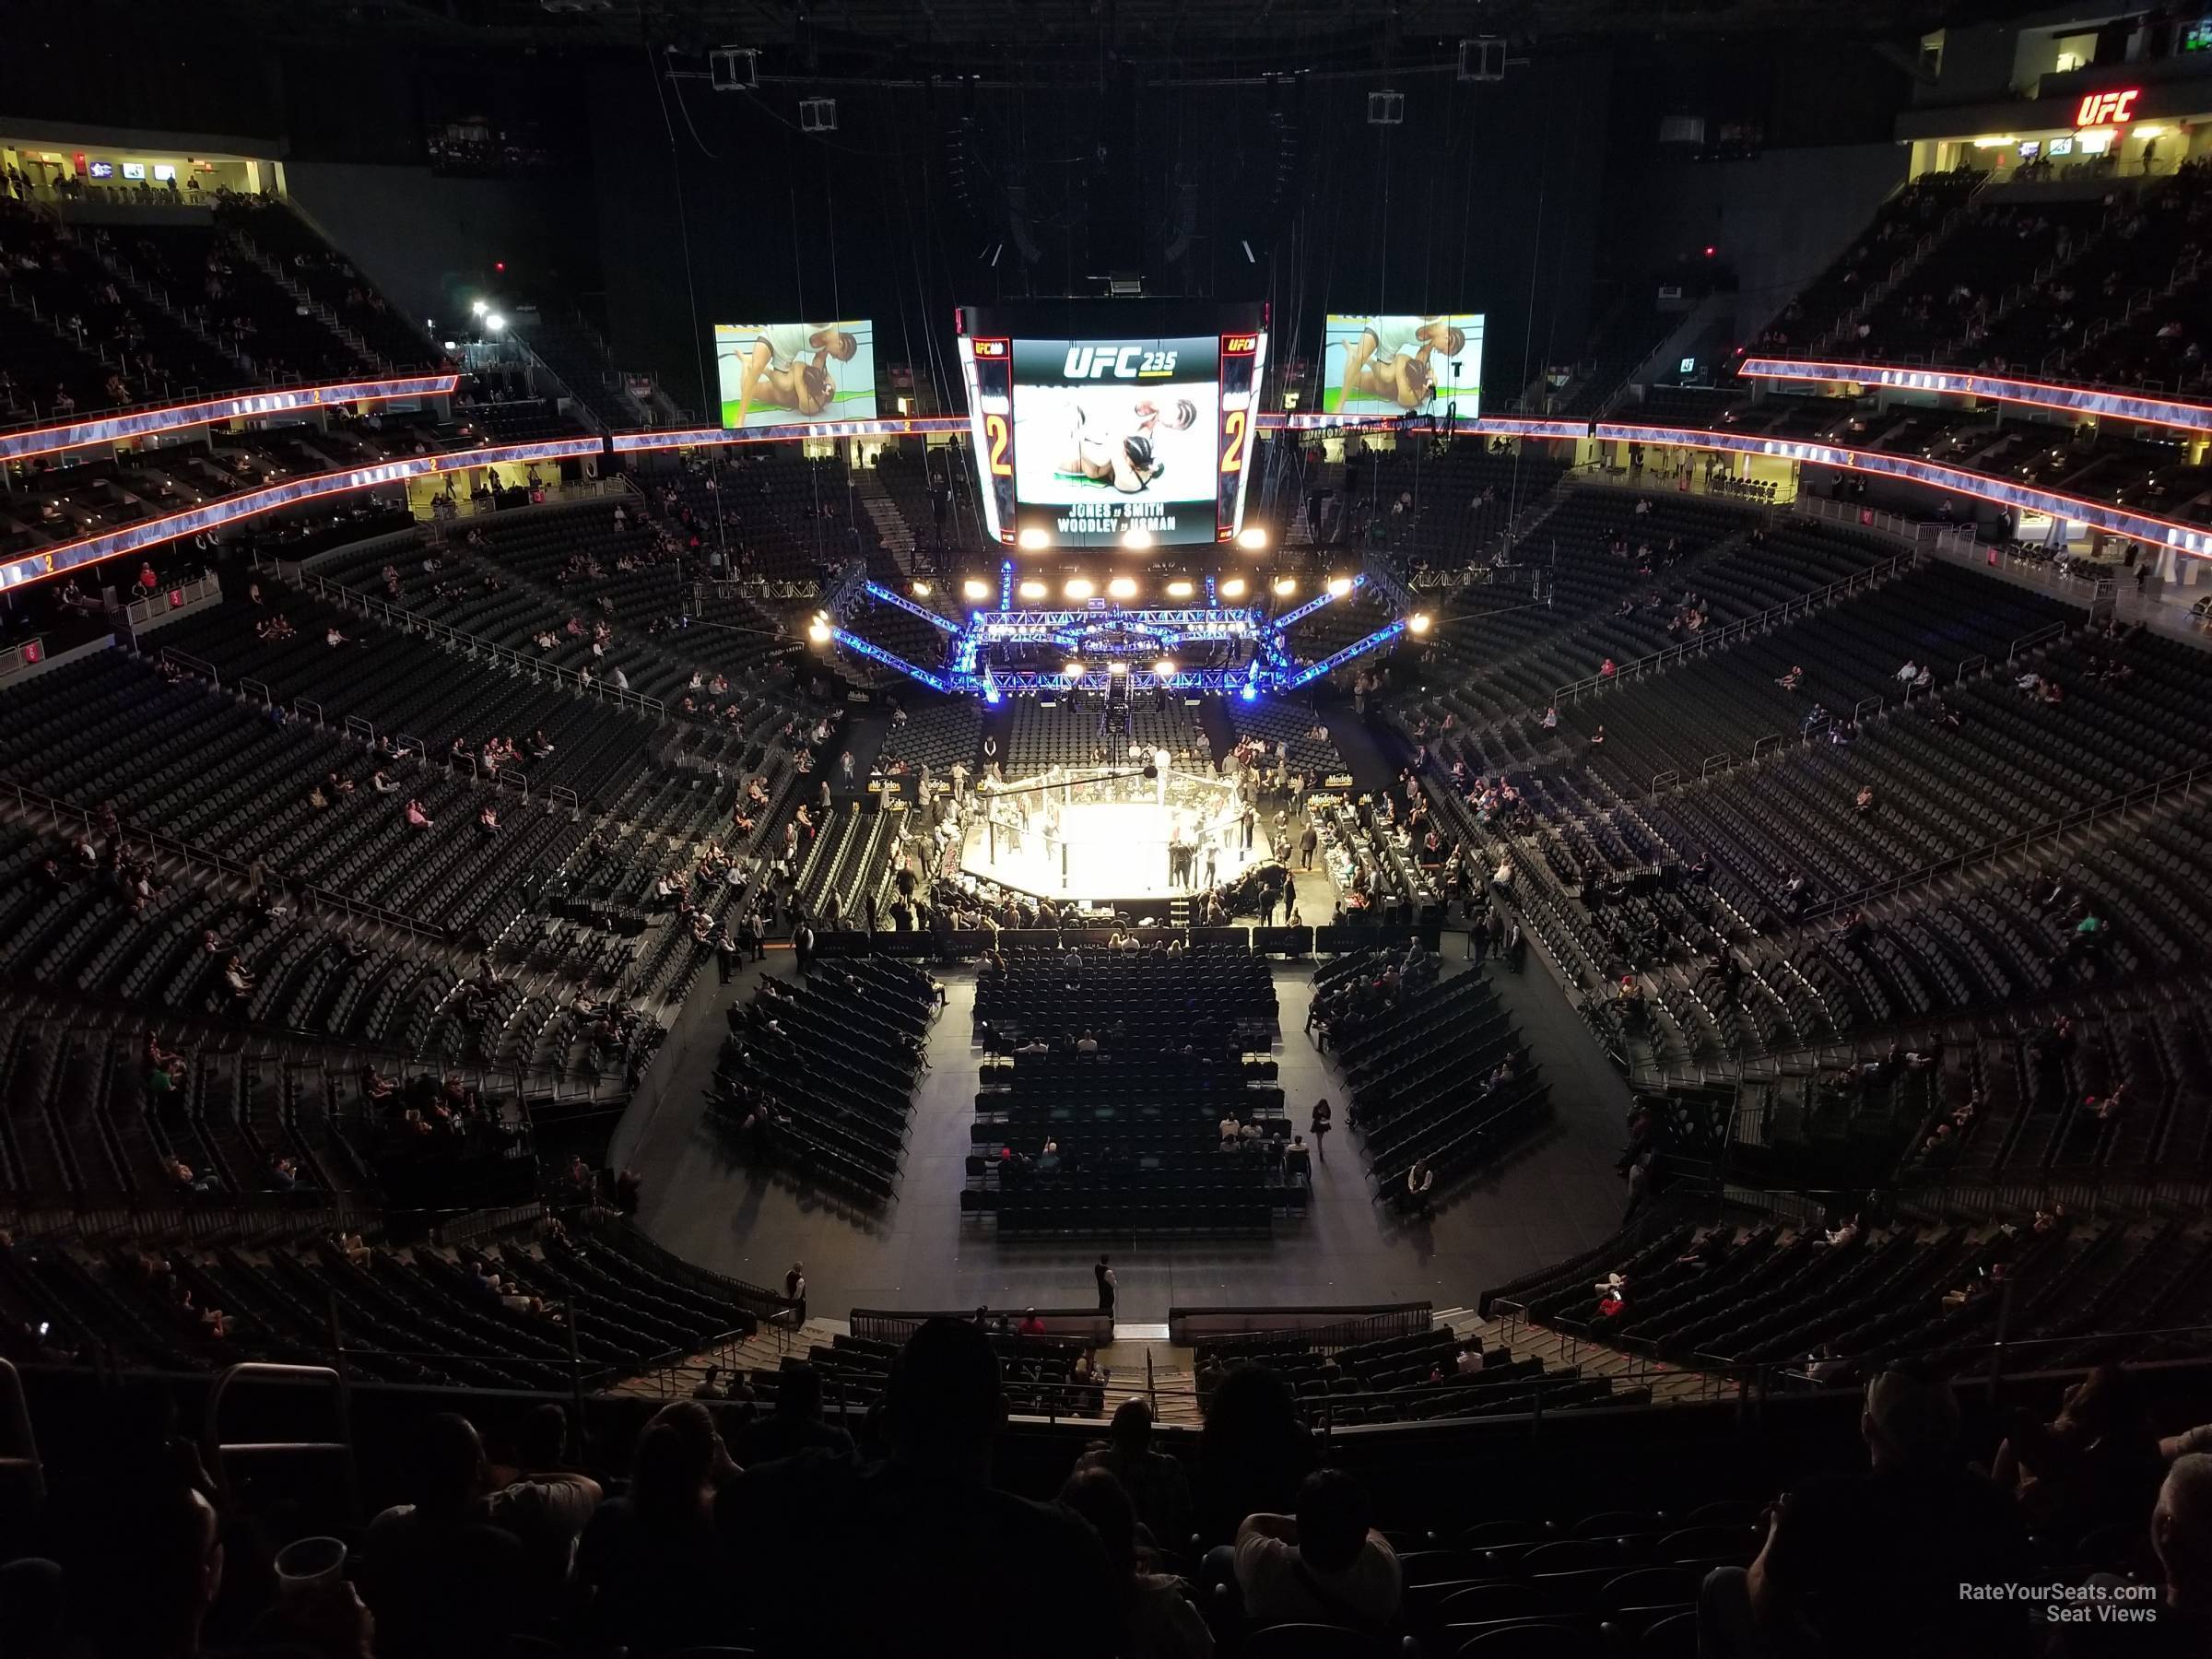 T-Mobile Arena Section 214 Fighting Seating - RateYourSeats.com